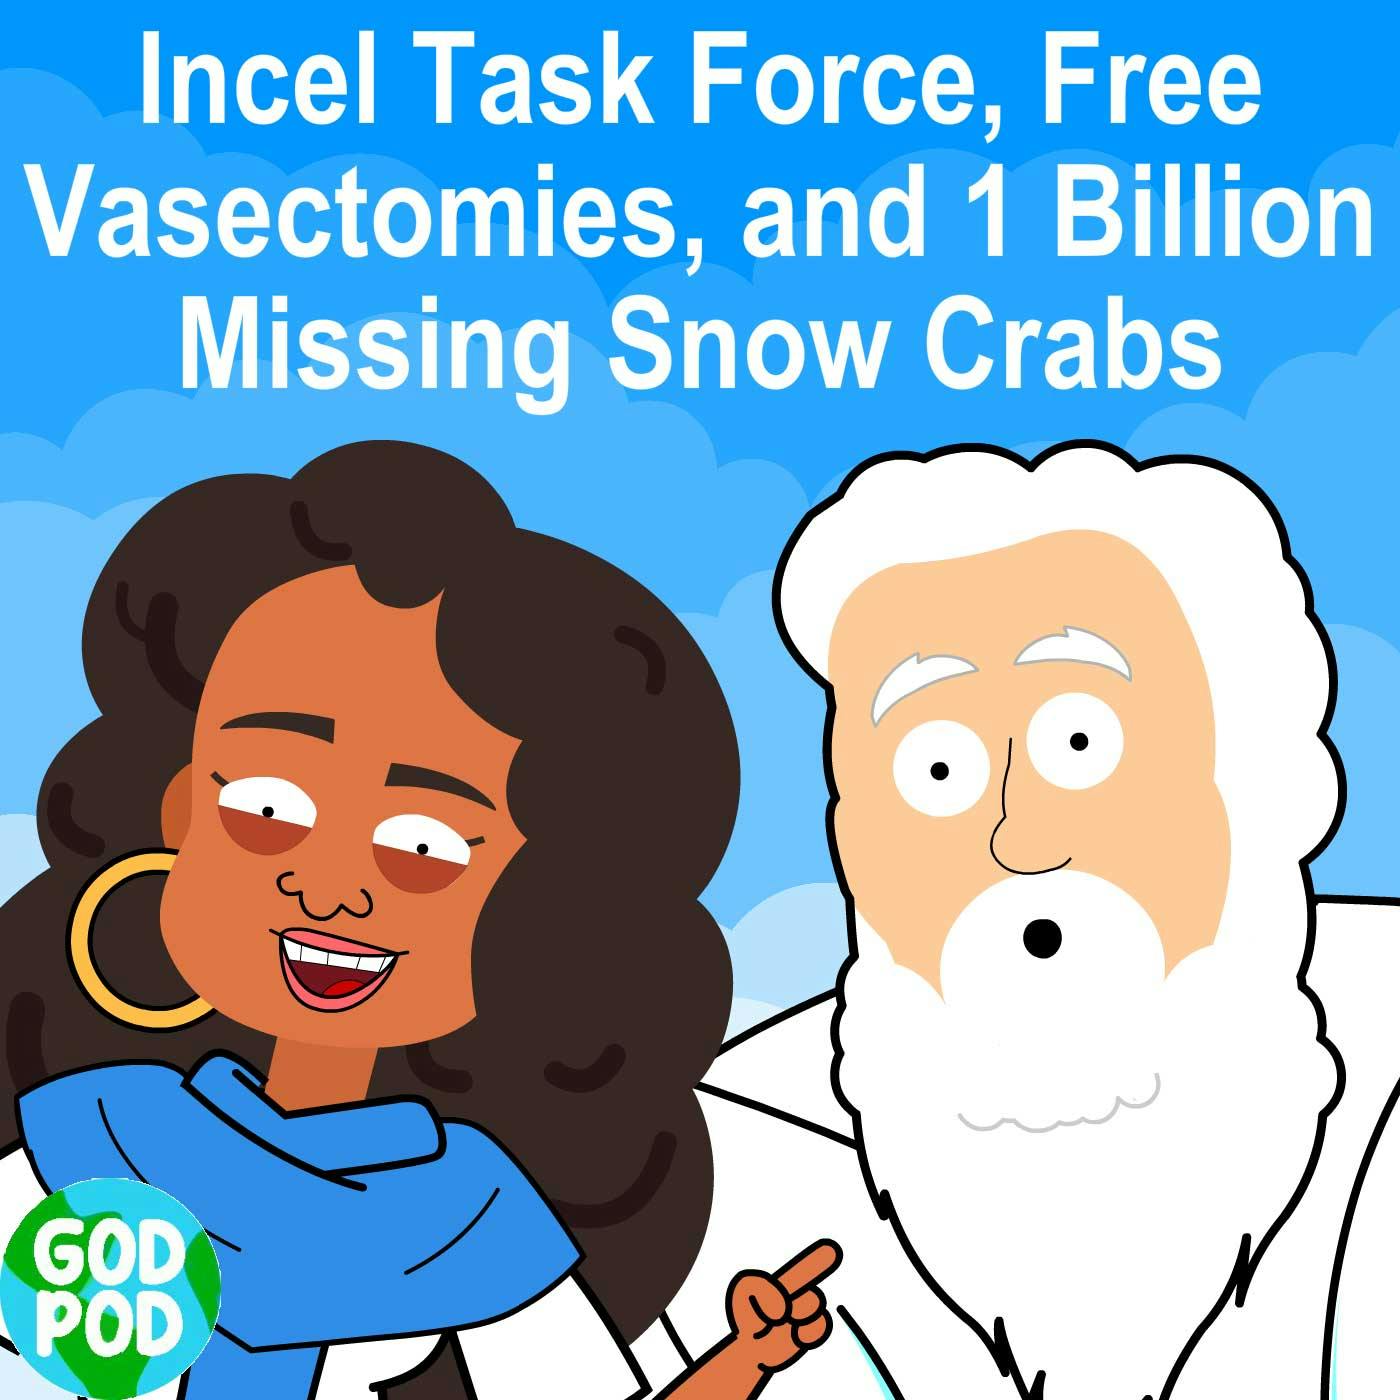 Incel Task Force, Free Vasectomies, and 1 Billion Missing Snow Crabs